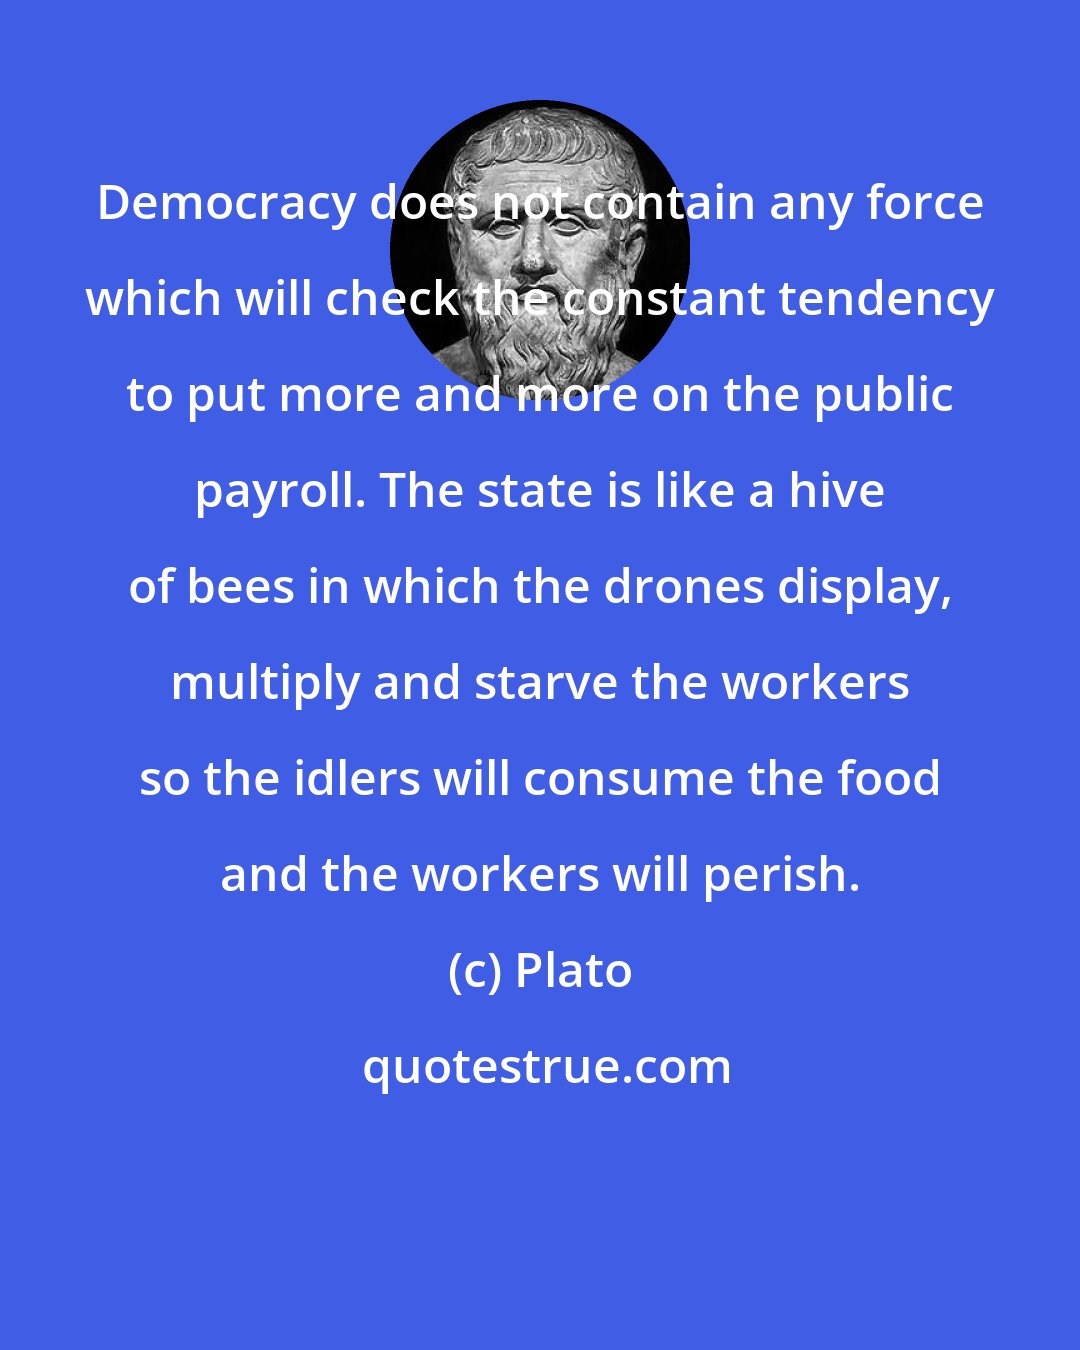 Plato: Democracy does not contain any force which will check the constant tendency to put more and more on the public payroll. The state is like a hive of bees in which the drones display, multiply and starve the workers so the idlers will consume the food and the workers will perish.